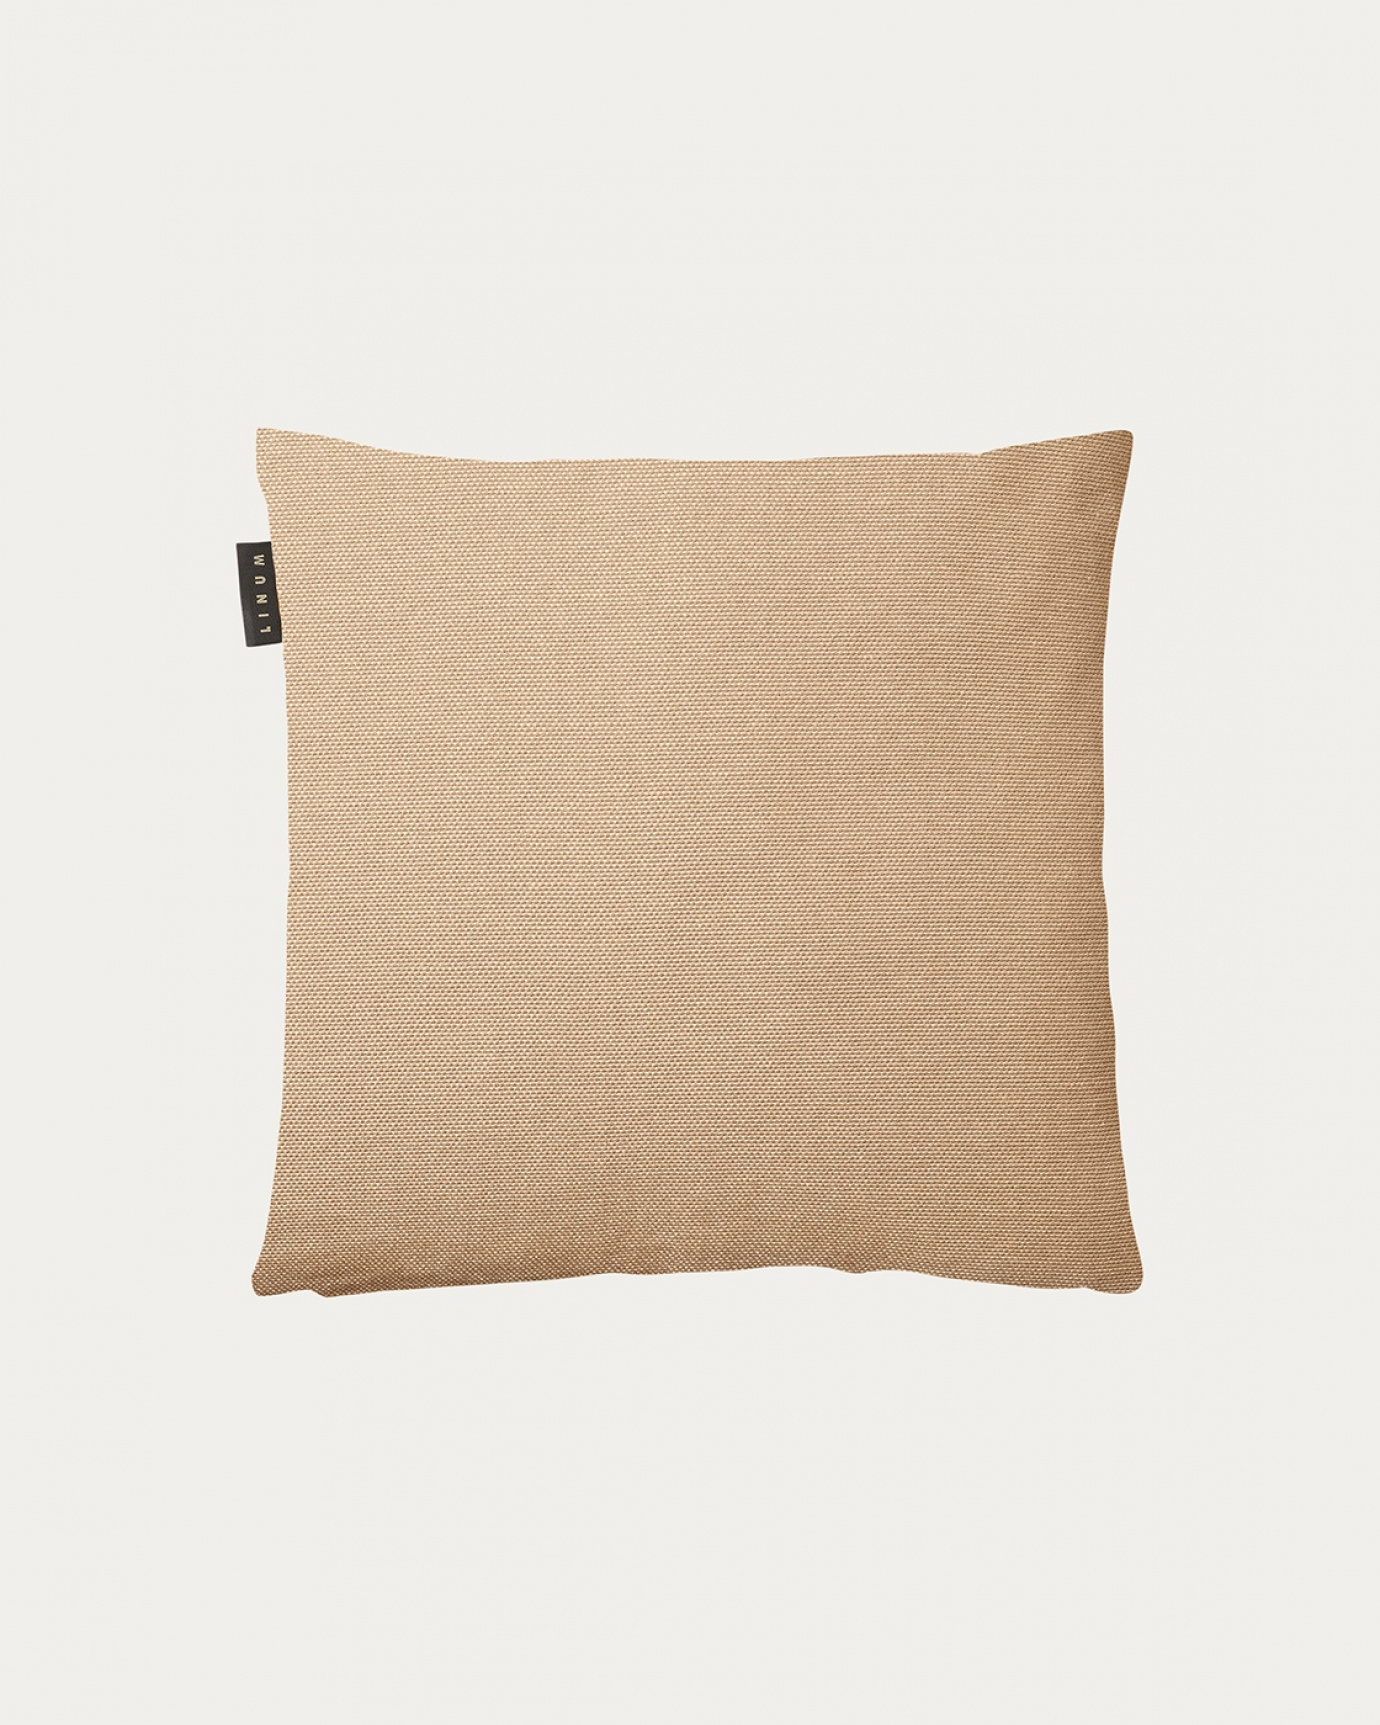 Product image camel brown PEPPER cushion cover made of soft cotton from LINUM DESIGN. Easy to wash and durable for generations. Size 40x40 cm.